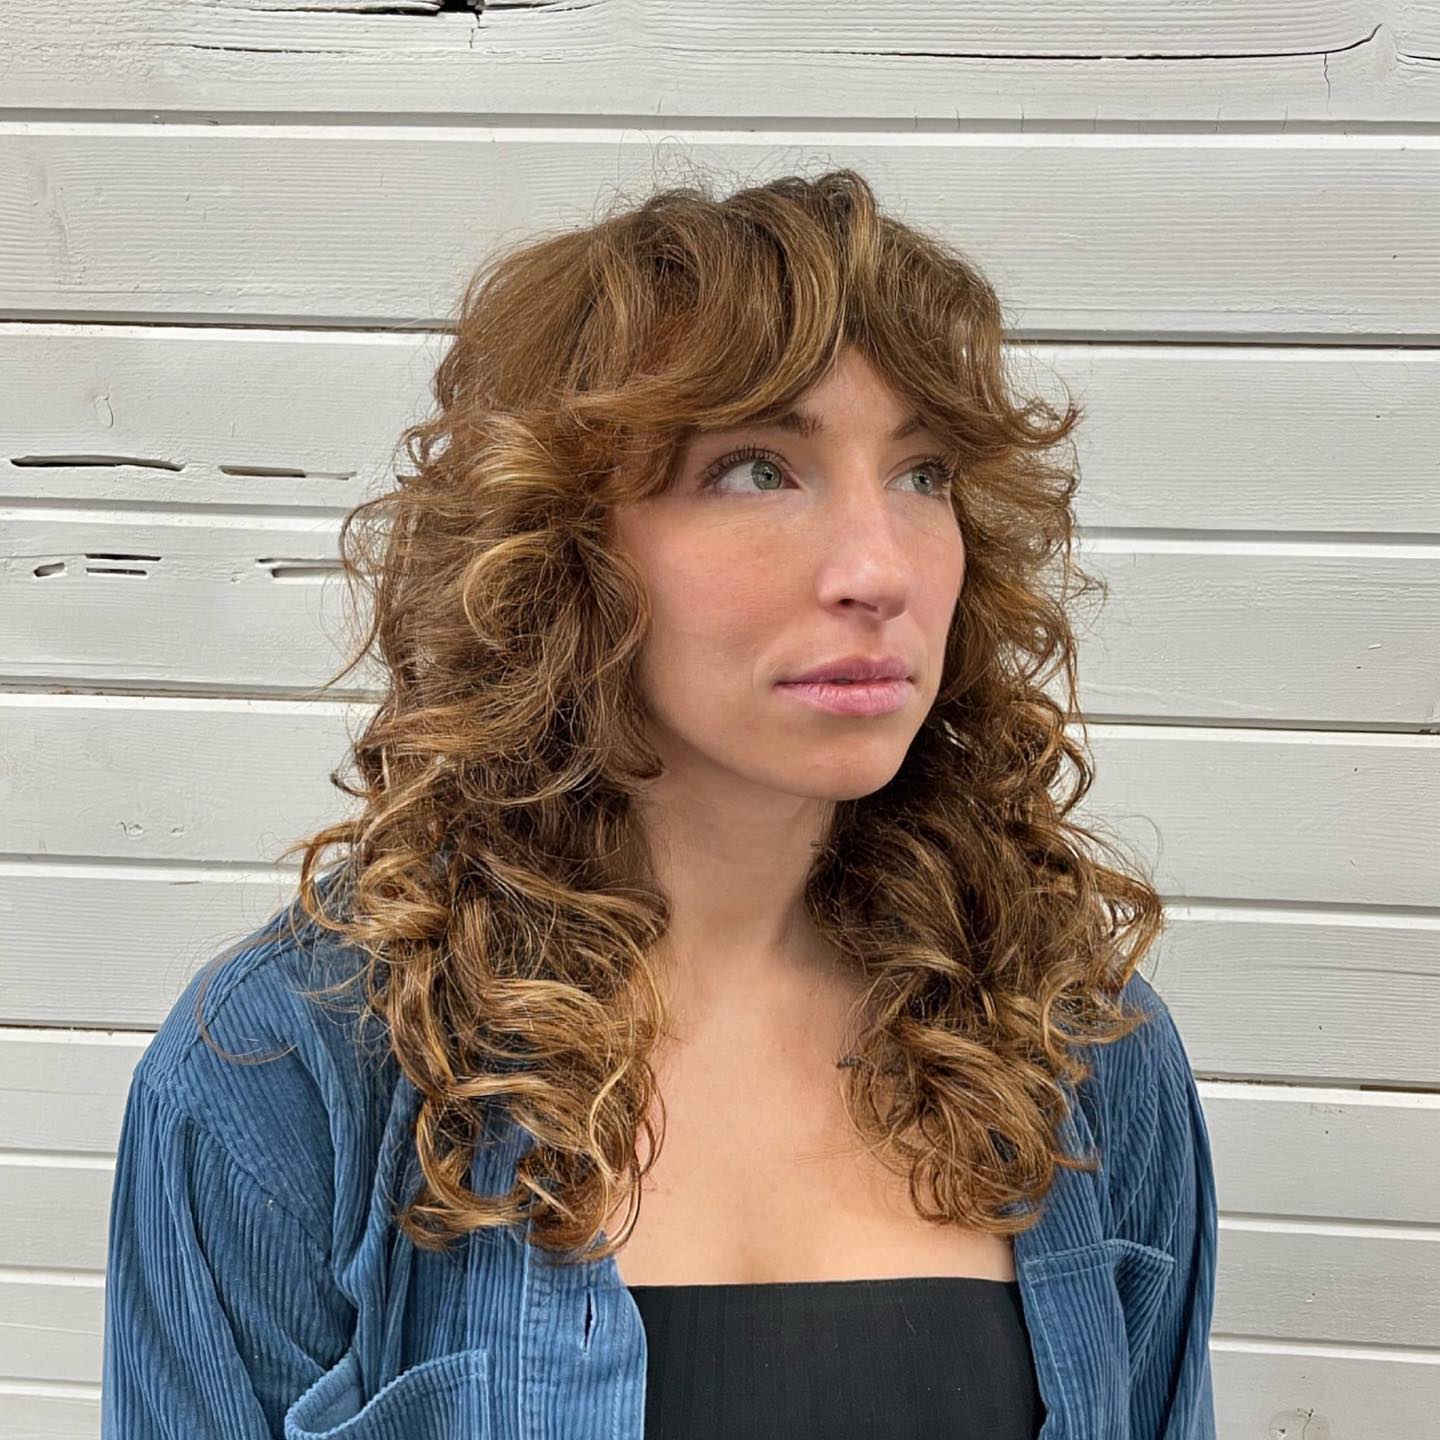 Curly Shag Hairstyle 37 Curly hair shaggy bob | Curly shag mullet | Medium length curly shags Curly Shag Hairstyles for Women